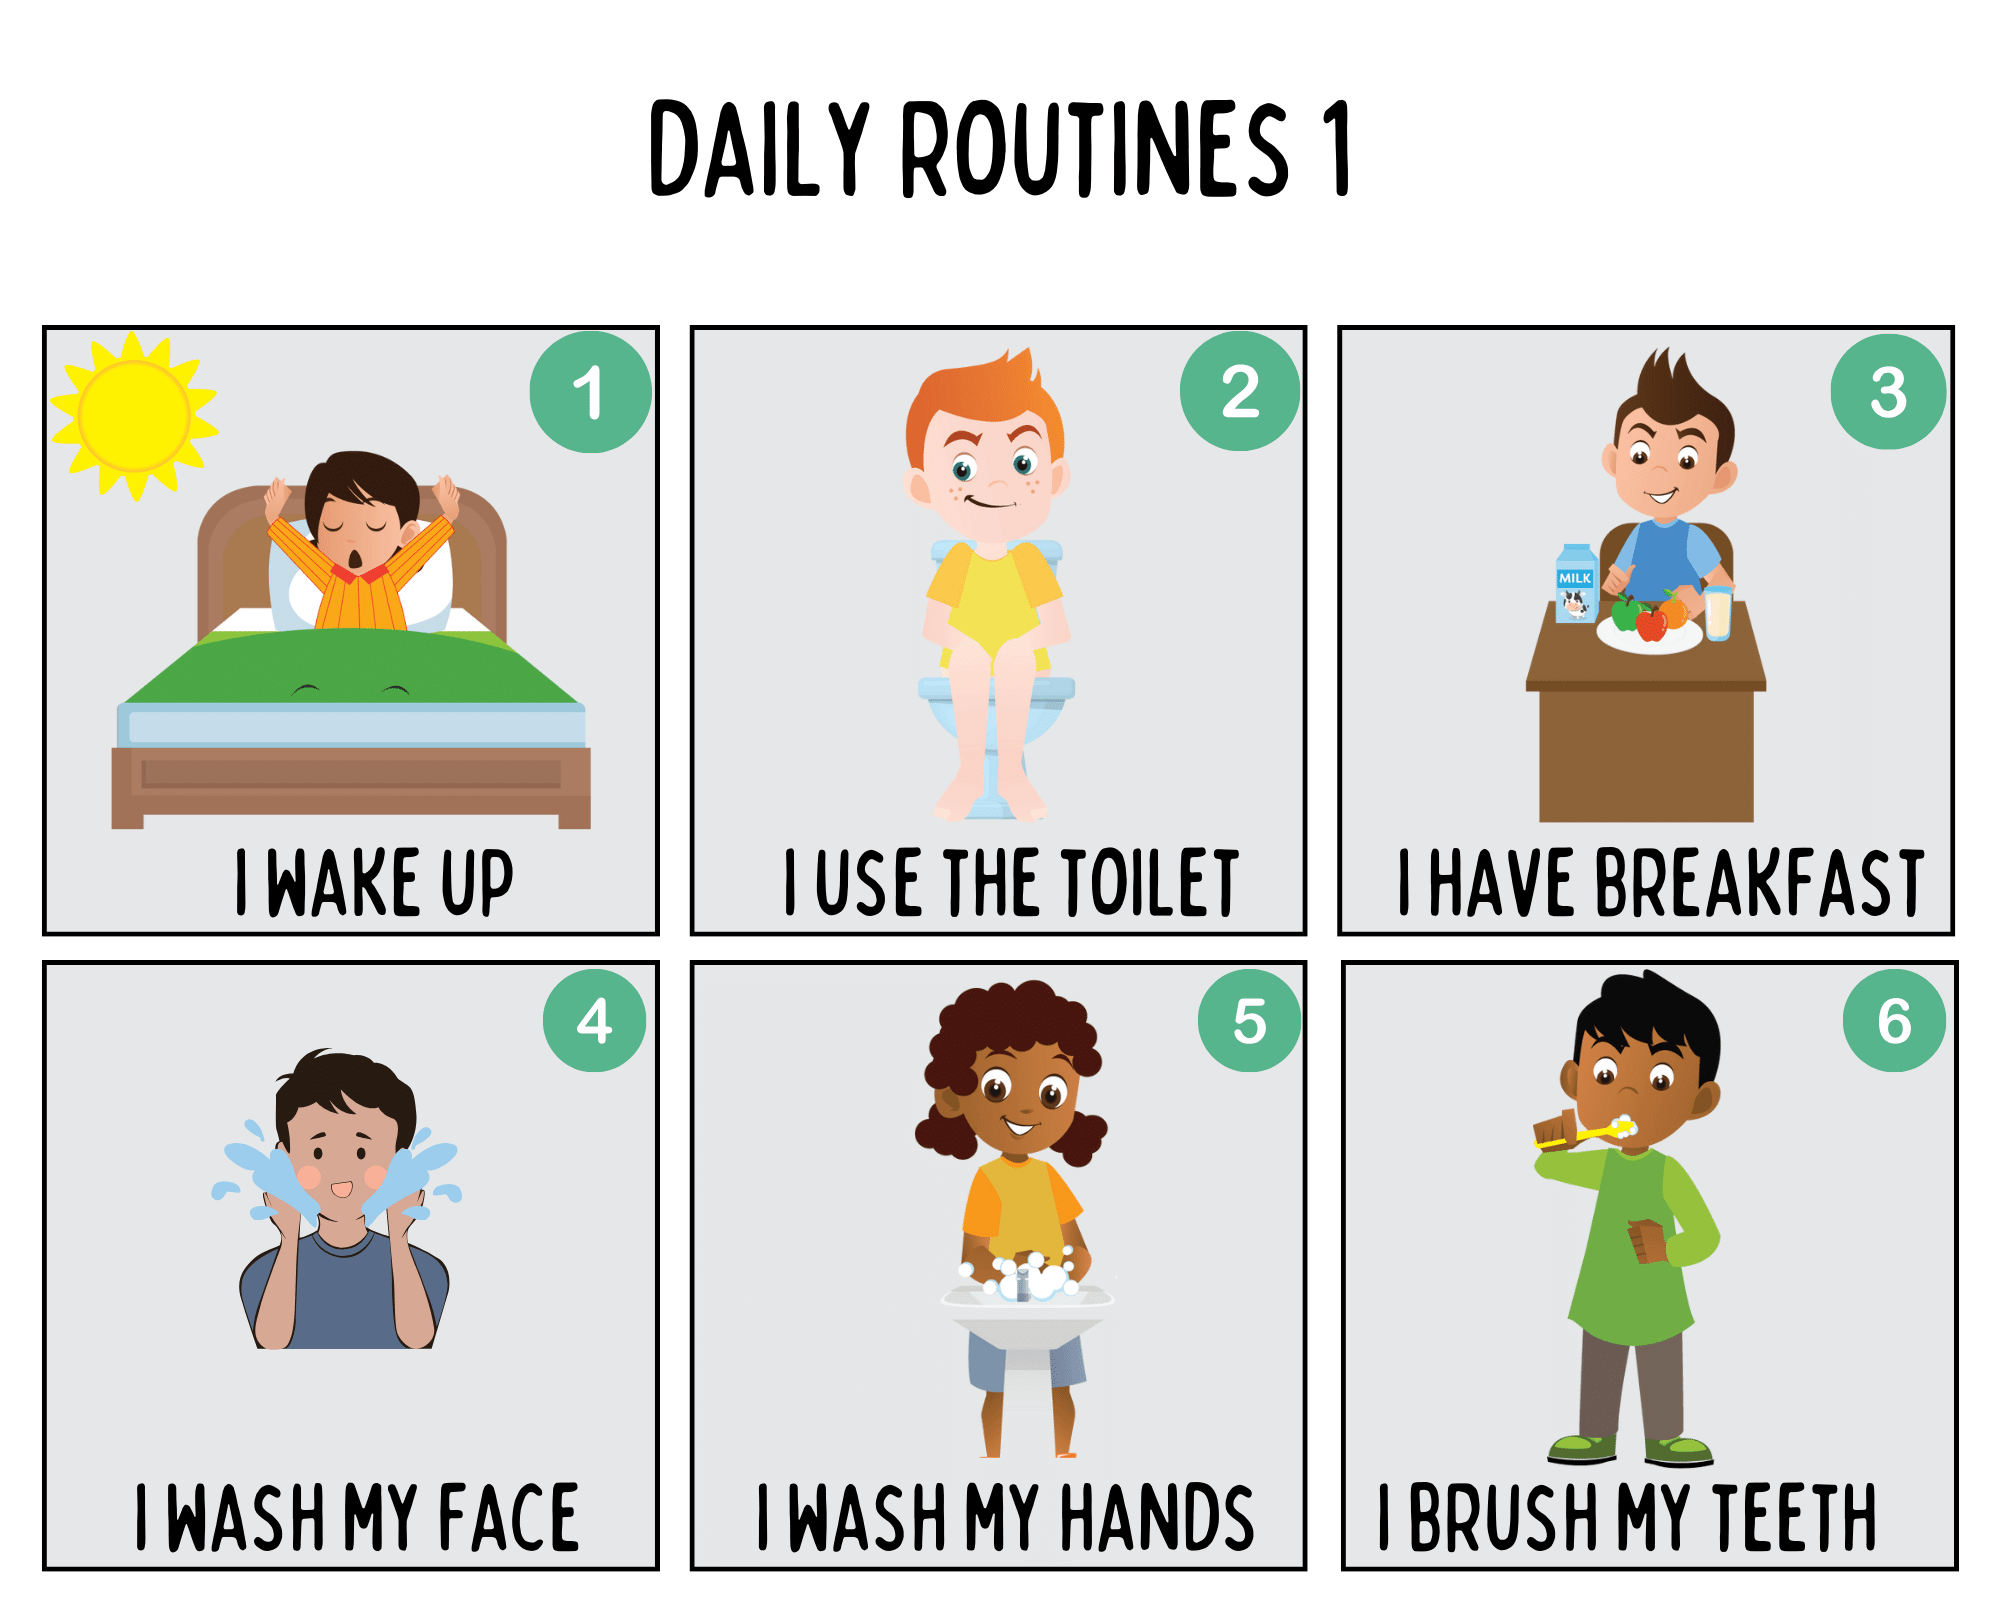 Daily routines schedule